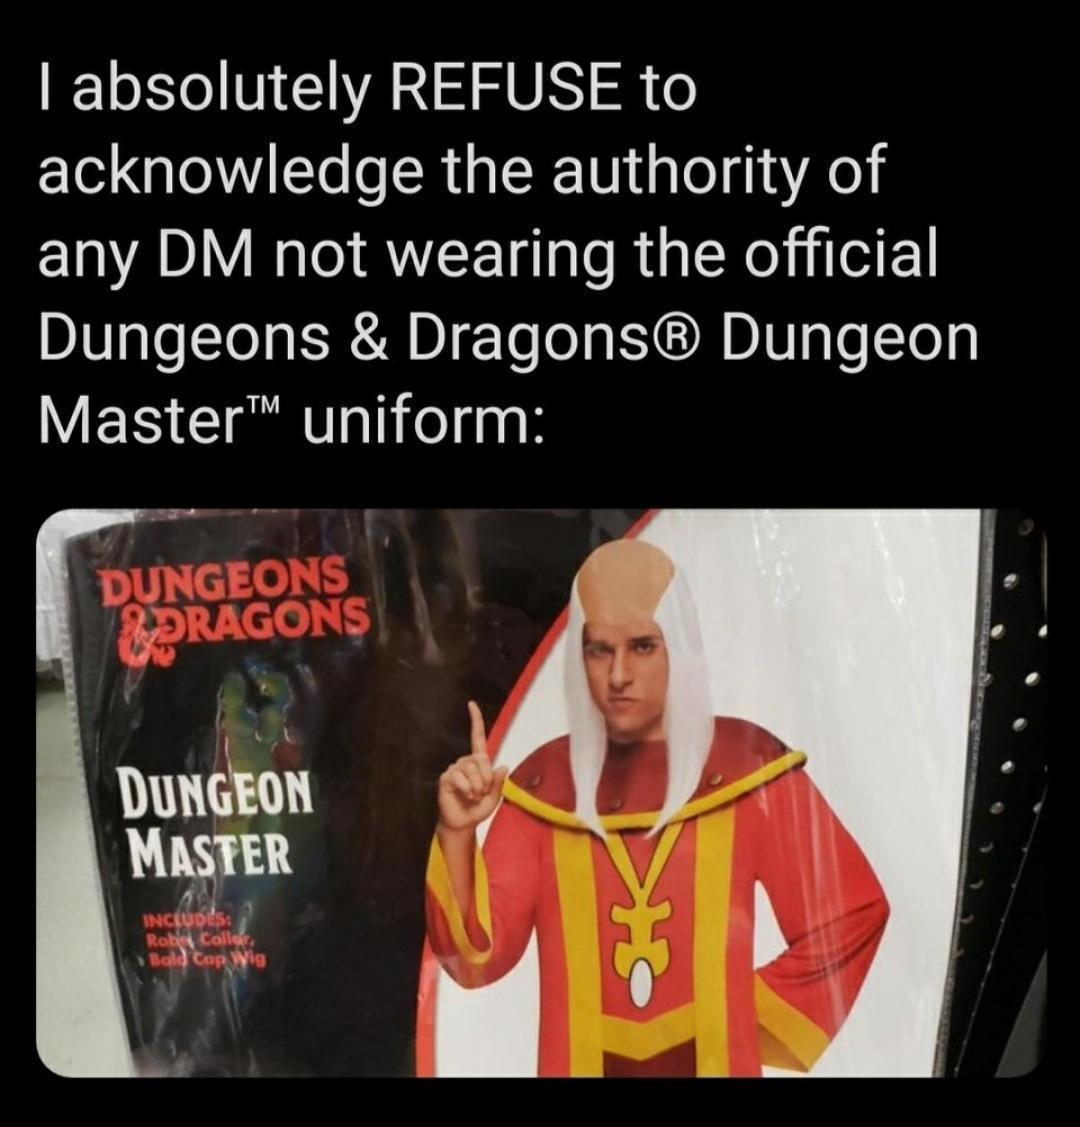 dank memes - adam dungeon and dragons outfit - I absolutely Refuse to acknowledge the authority of any Dm not wearing the official Dungeons & Dragons Dungeon Master uniform Tm Dungeons Pragons Dungeon Master Includes Robin Colla Bald Cap Wig